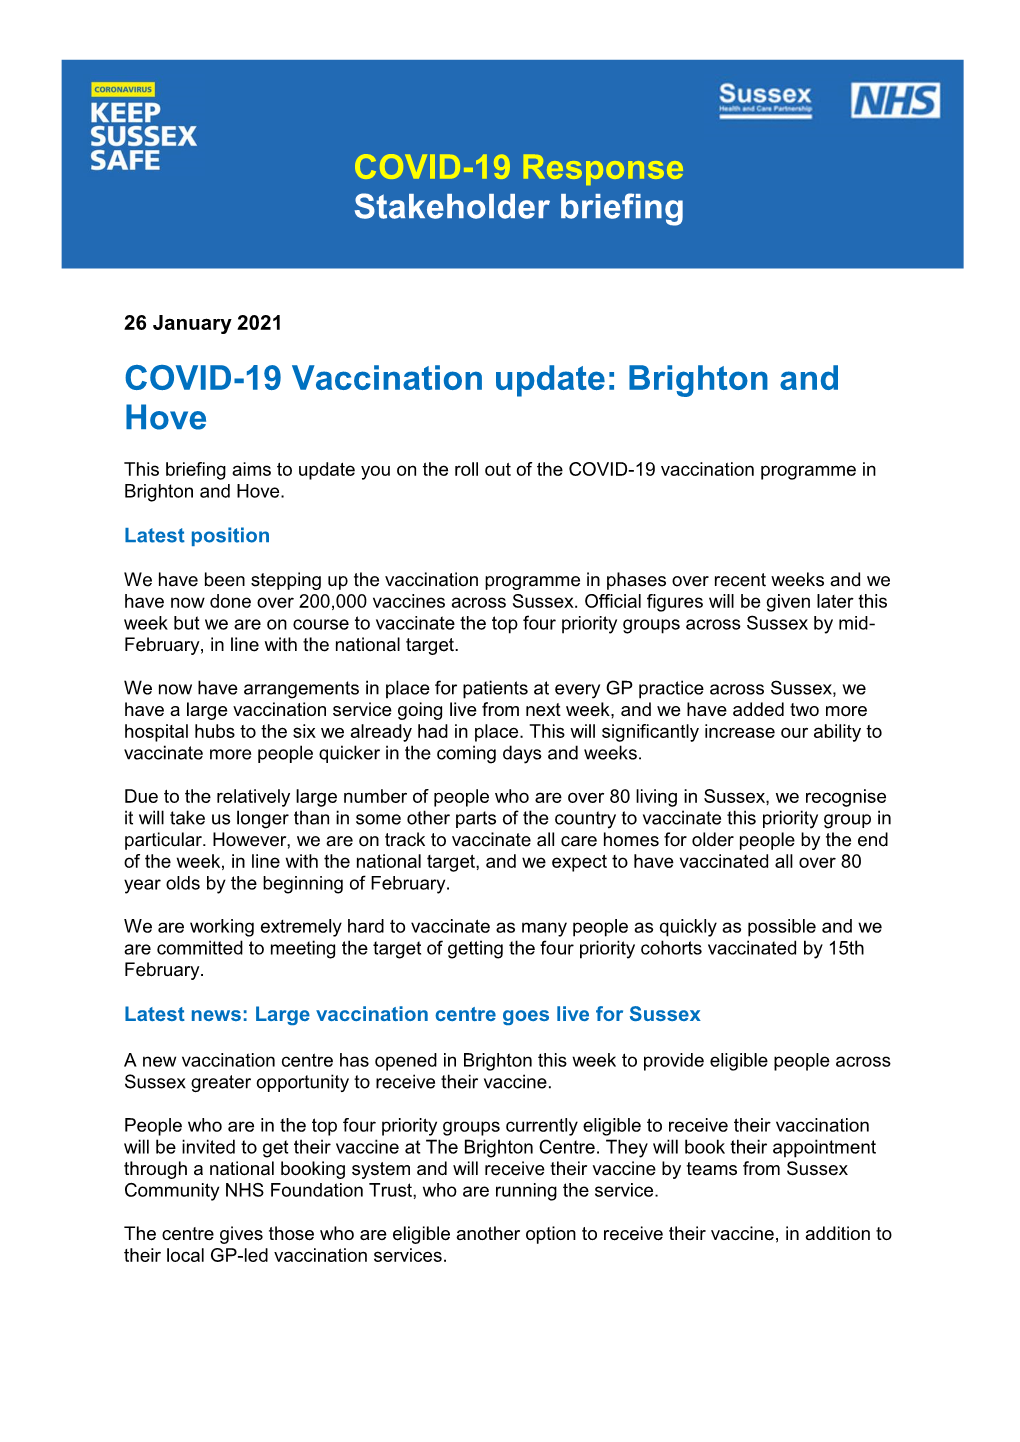 Brighton and Hove COVID-19 Vaccination Stakeholder Briefing 26